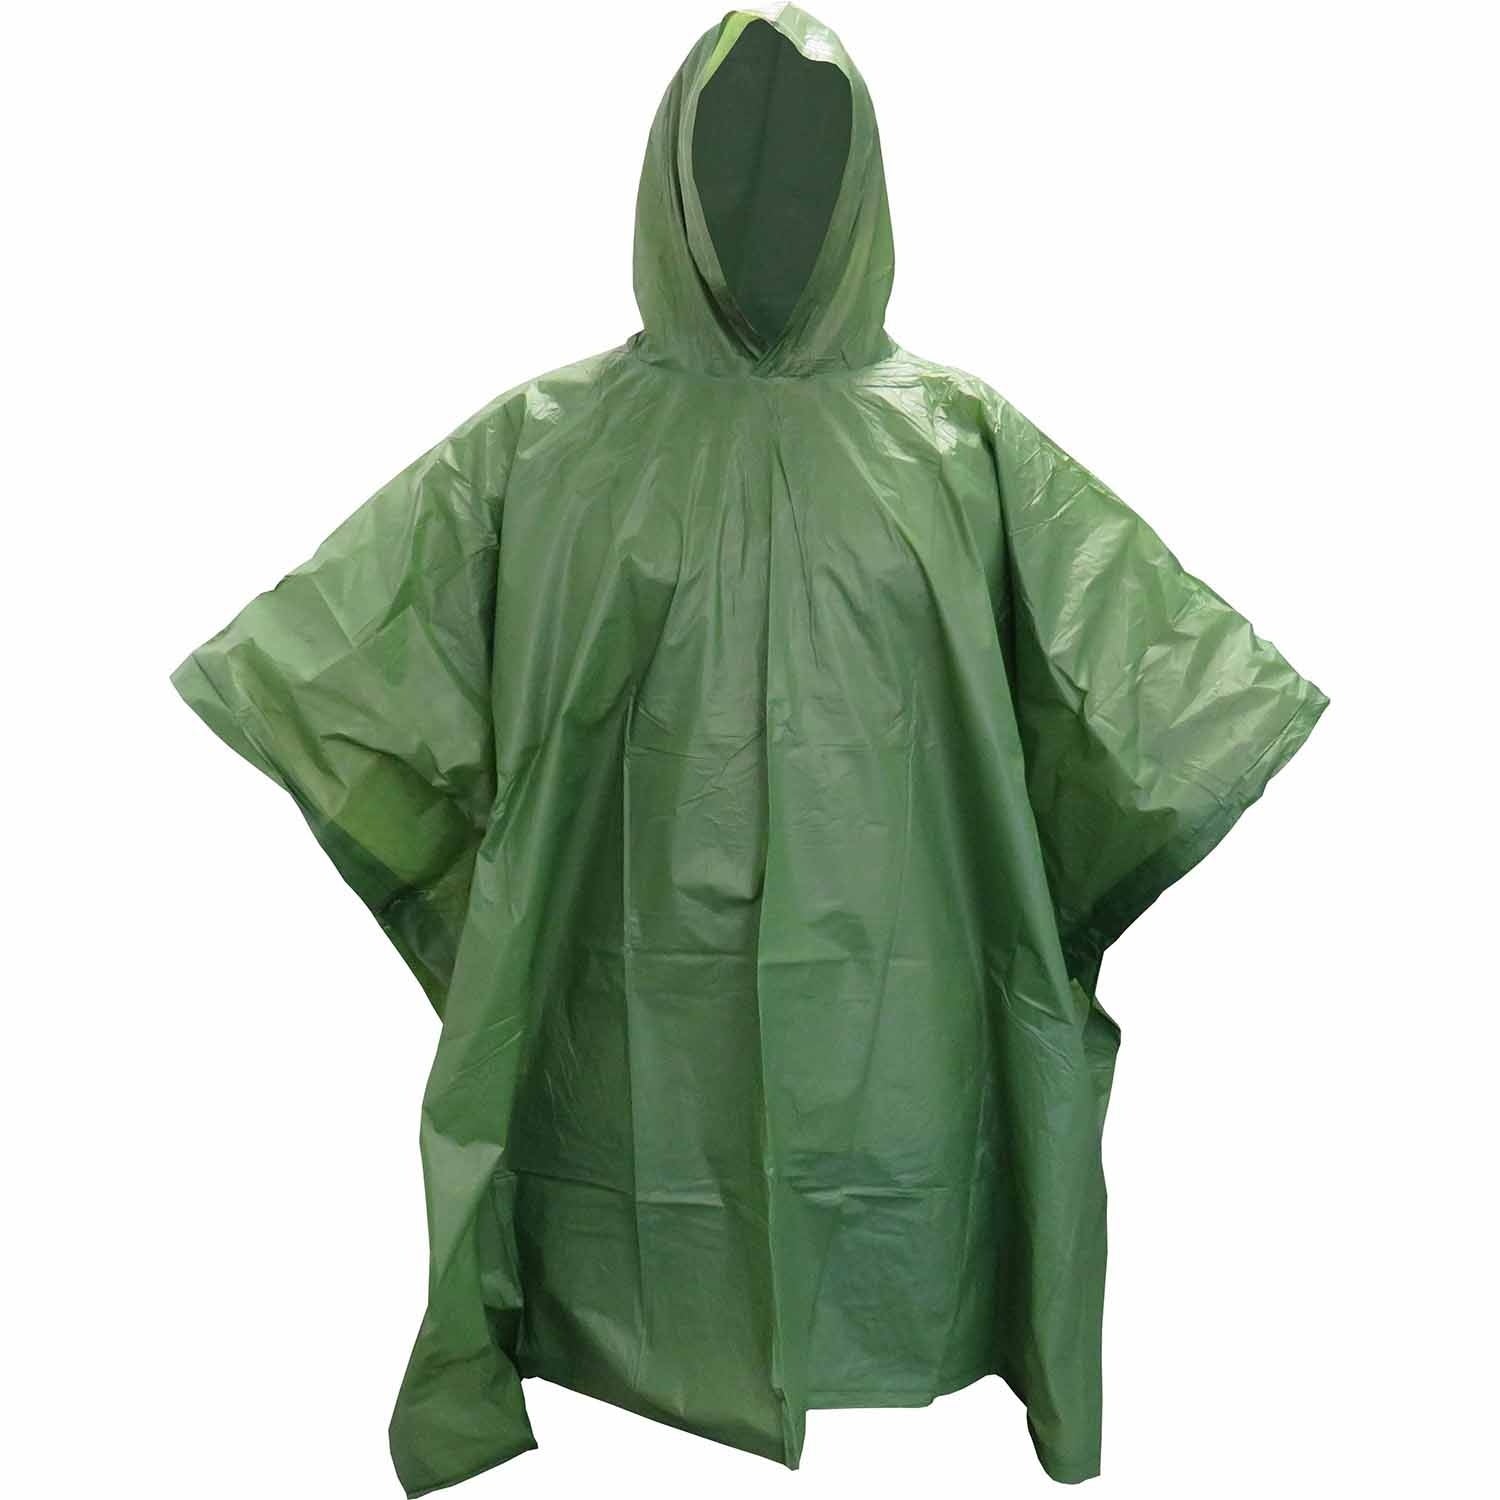 Dark Olive OD vinyl poncho 100% PVC  Waterproof with all weather hood  Lightweight and compact  Snap Closure on sides of poncho  Size: 127 x 203cm